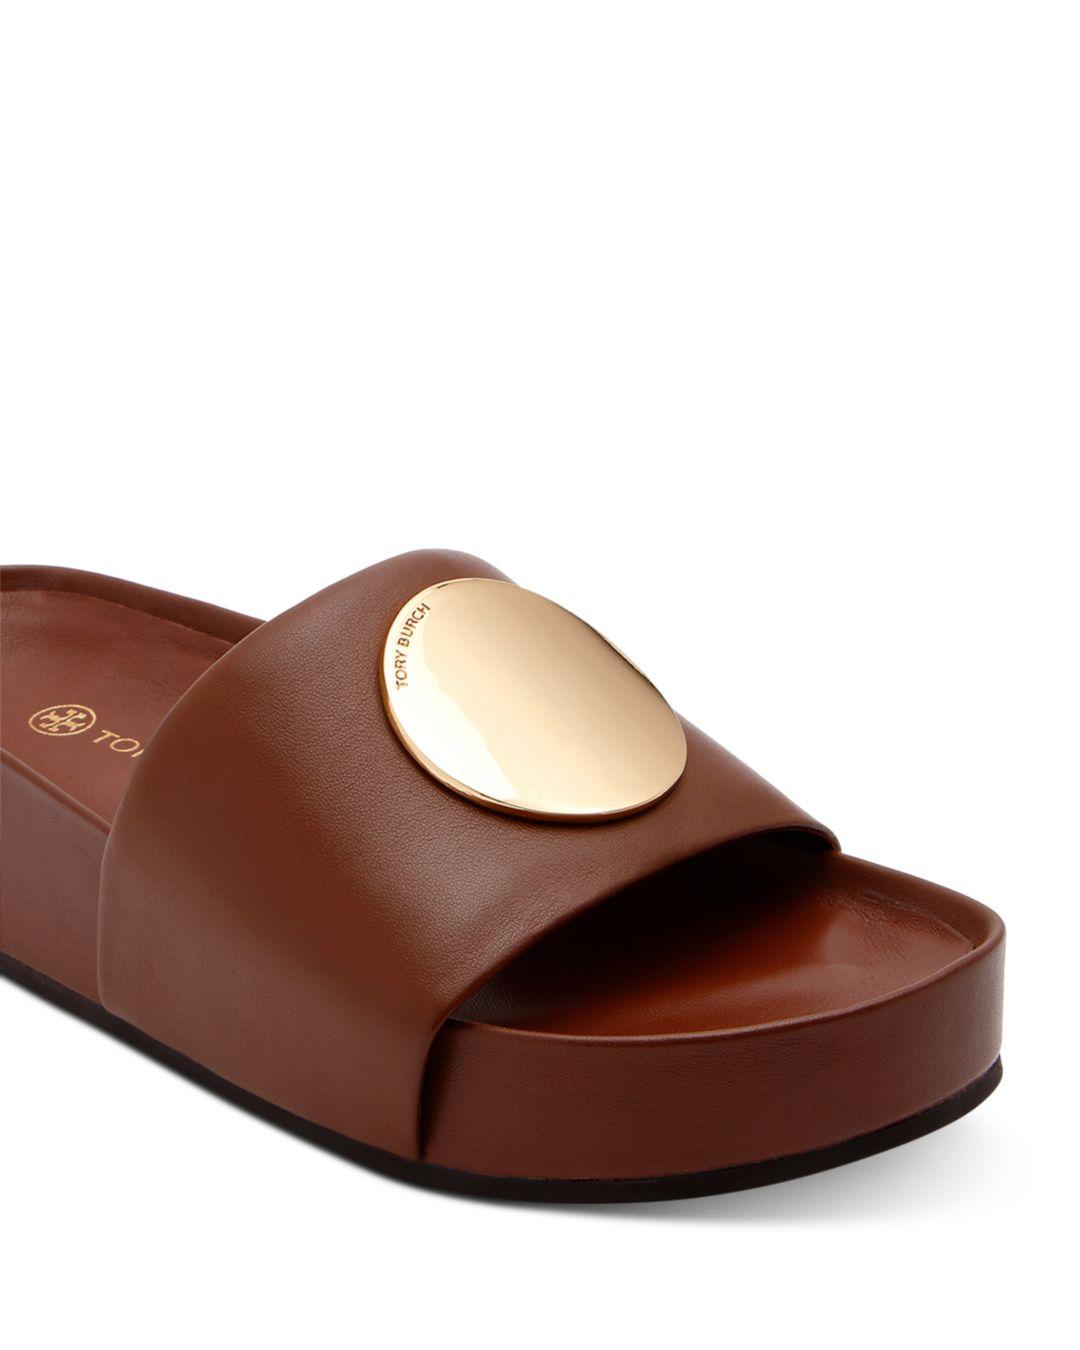 Tory Burch Leather Patos Slide in Burnt Tan (White) - Lyst